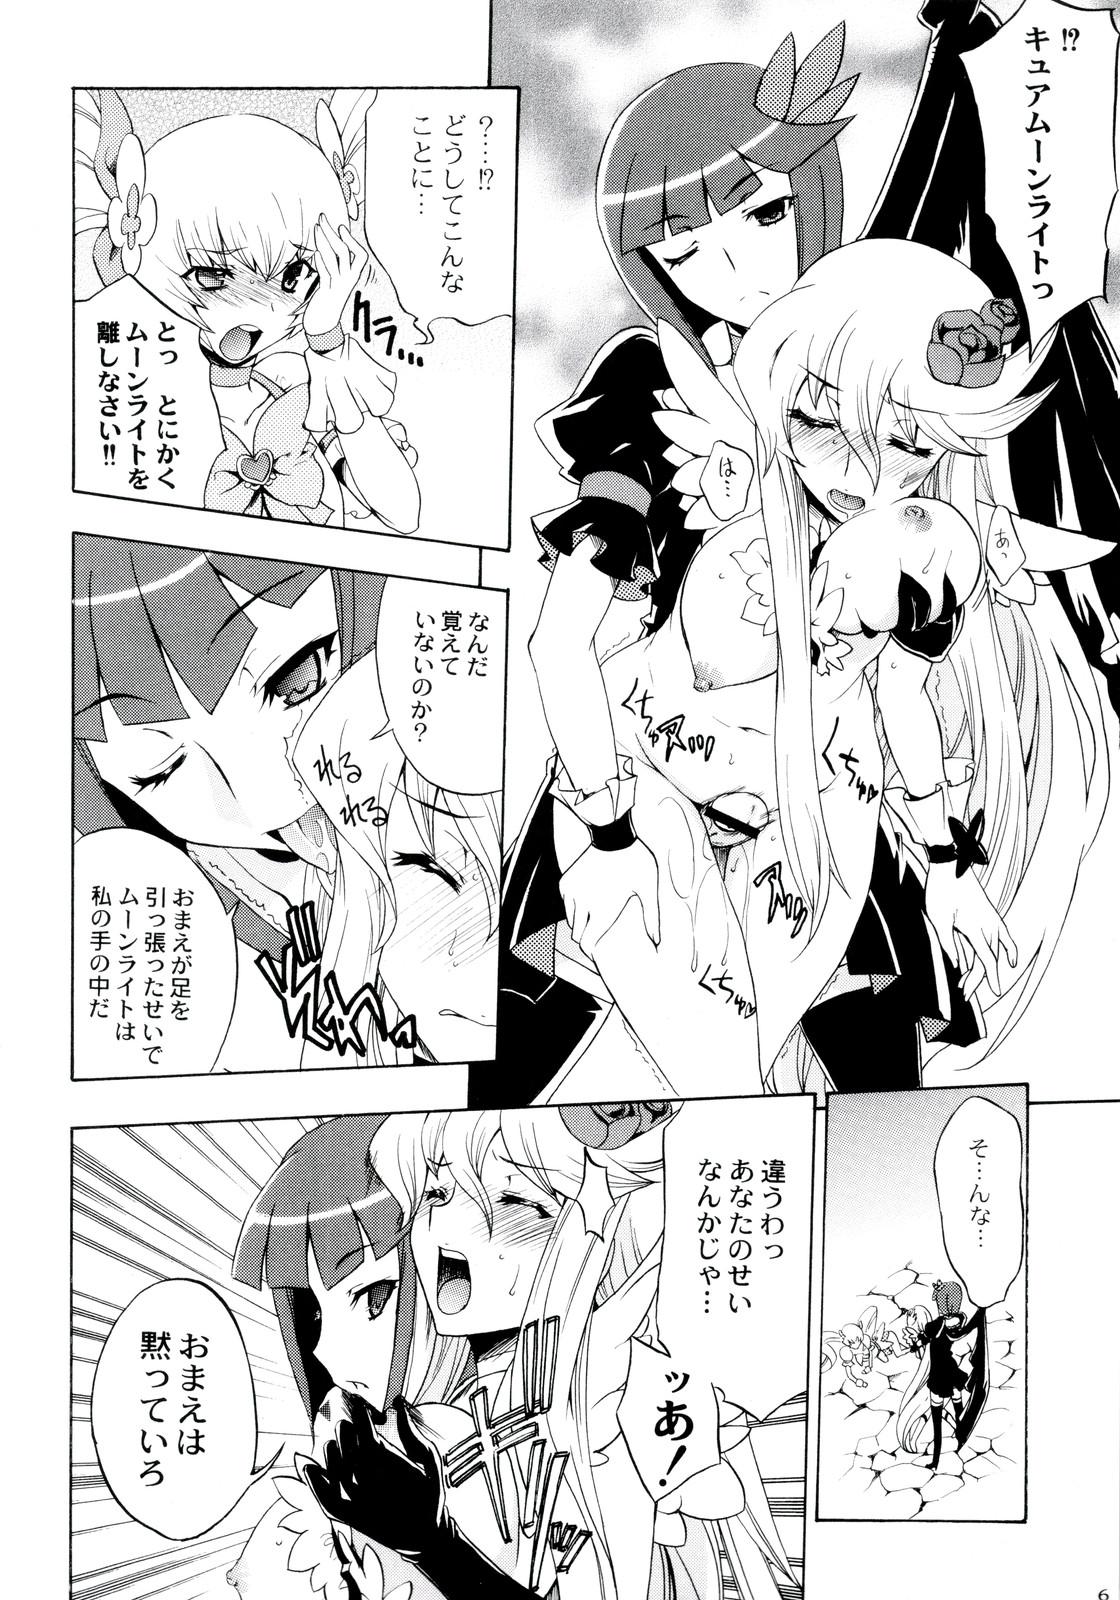 Doggy LOXONIN - Heartcatch precure Girl On Girl - Page 6